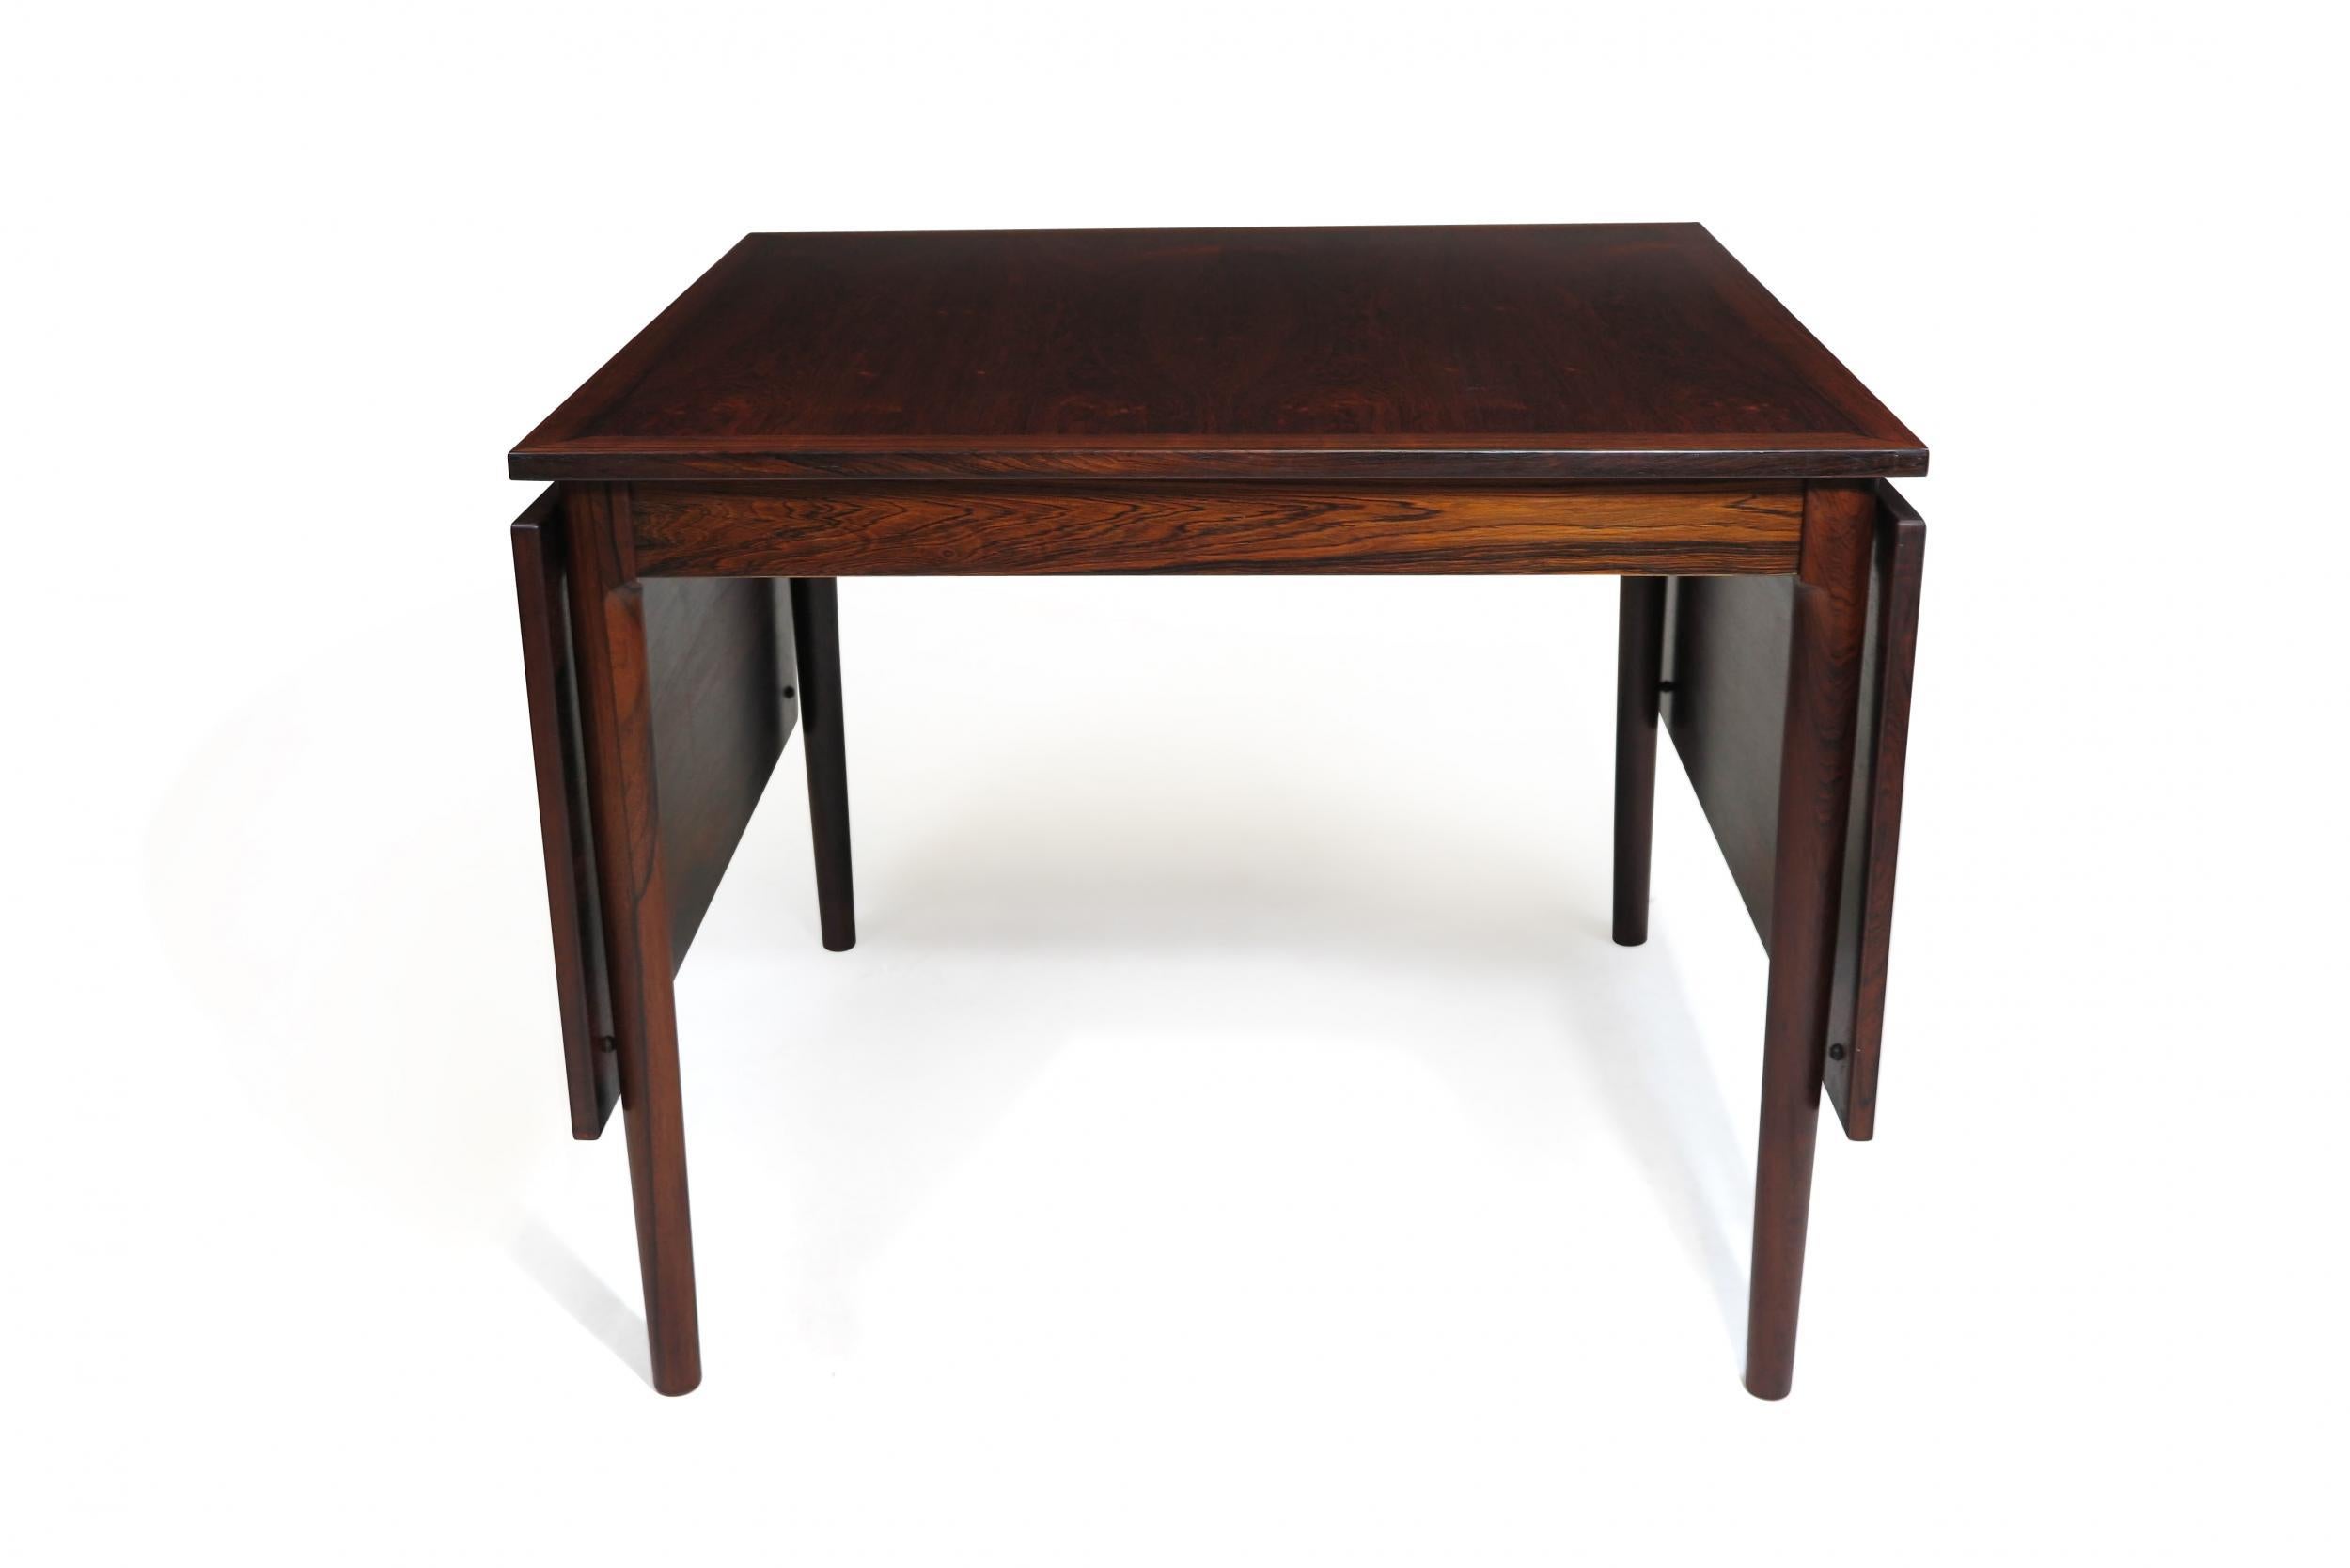 Danish Brazilian Rosewood drop-leaf dining table crafted of Brazilian rosewood with a consistent color-rich dark grain on the table and leaves; raised on tapered legs. The table can be modified to numerous configurations to suit different spaces.